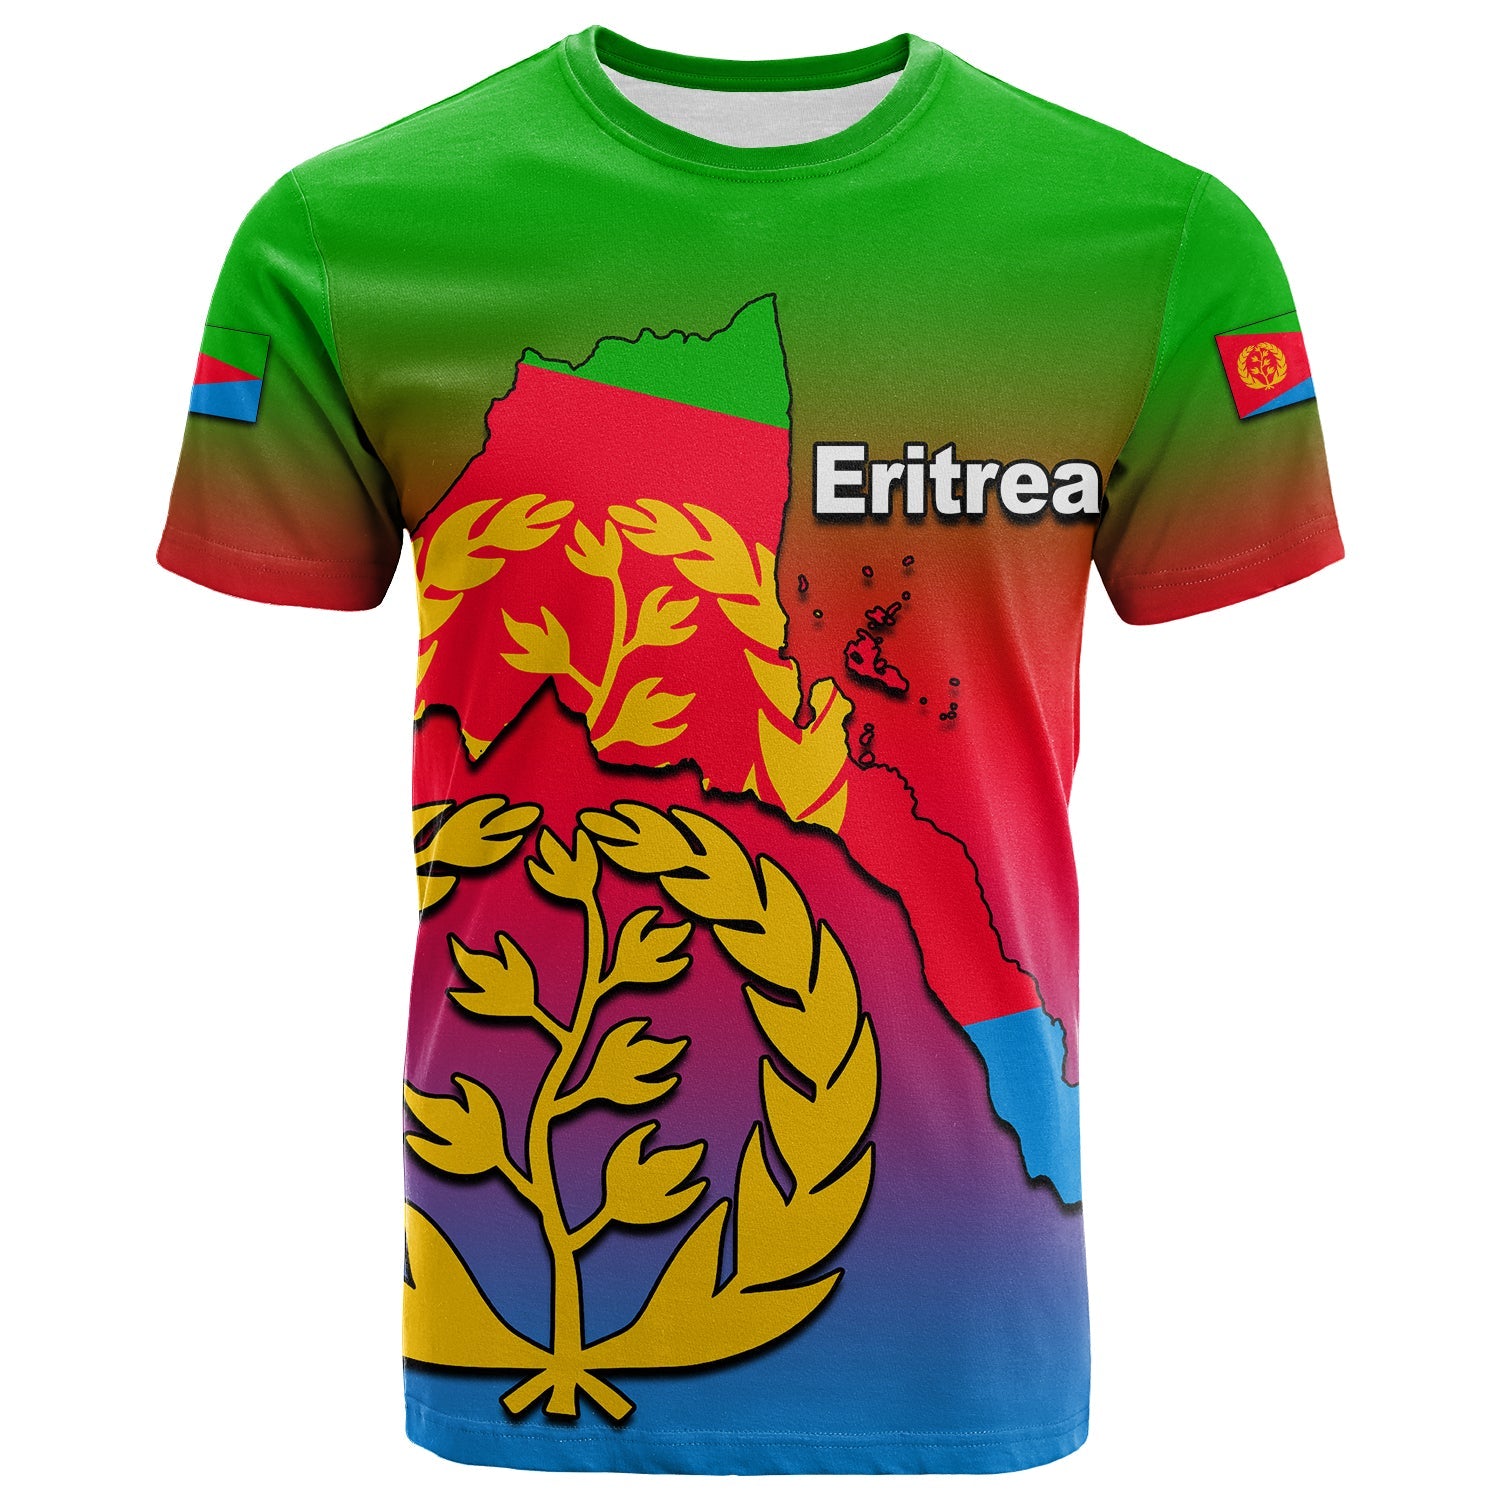 eritrea-independence-day-t-shirt-2022-style-no2